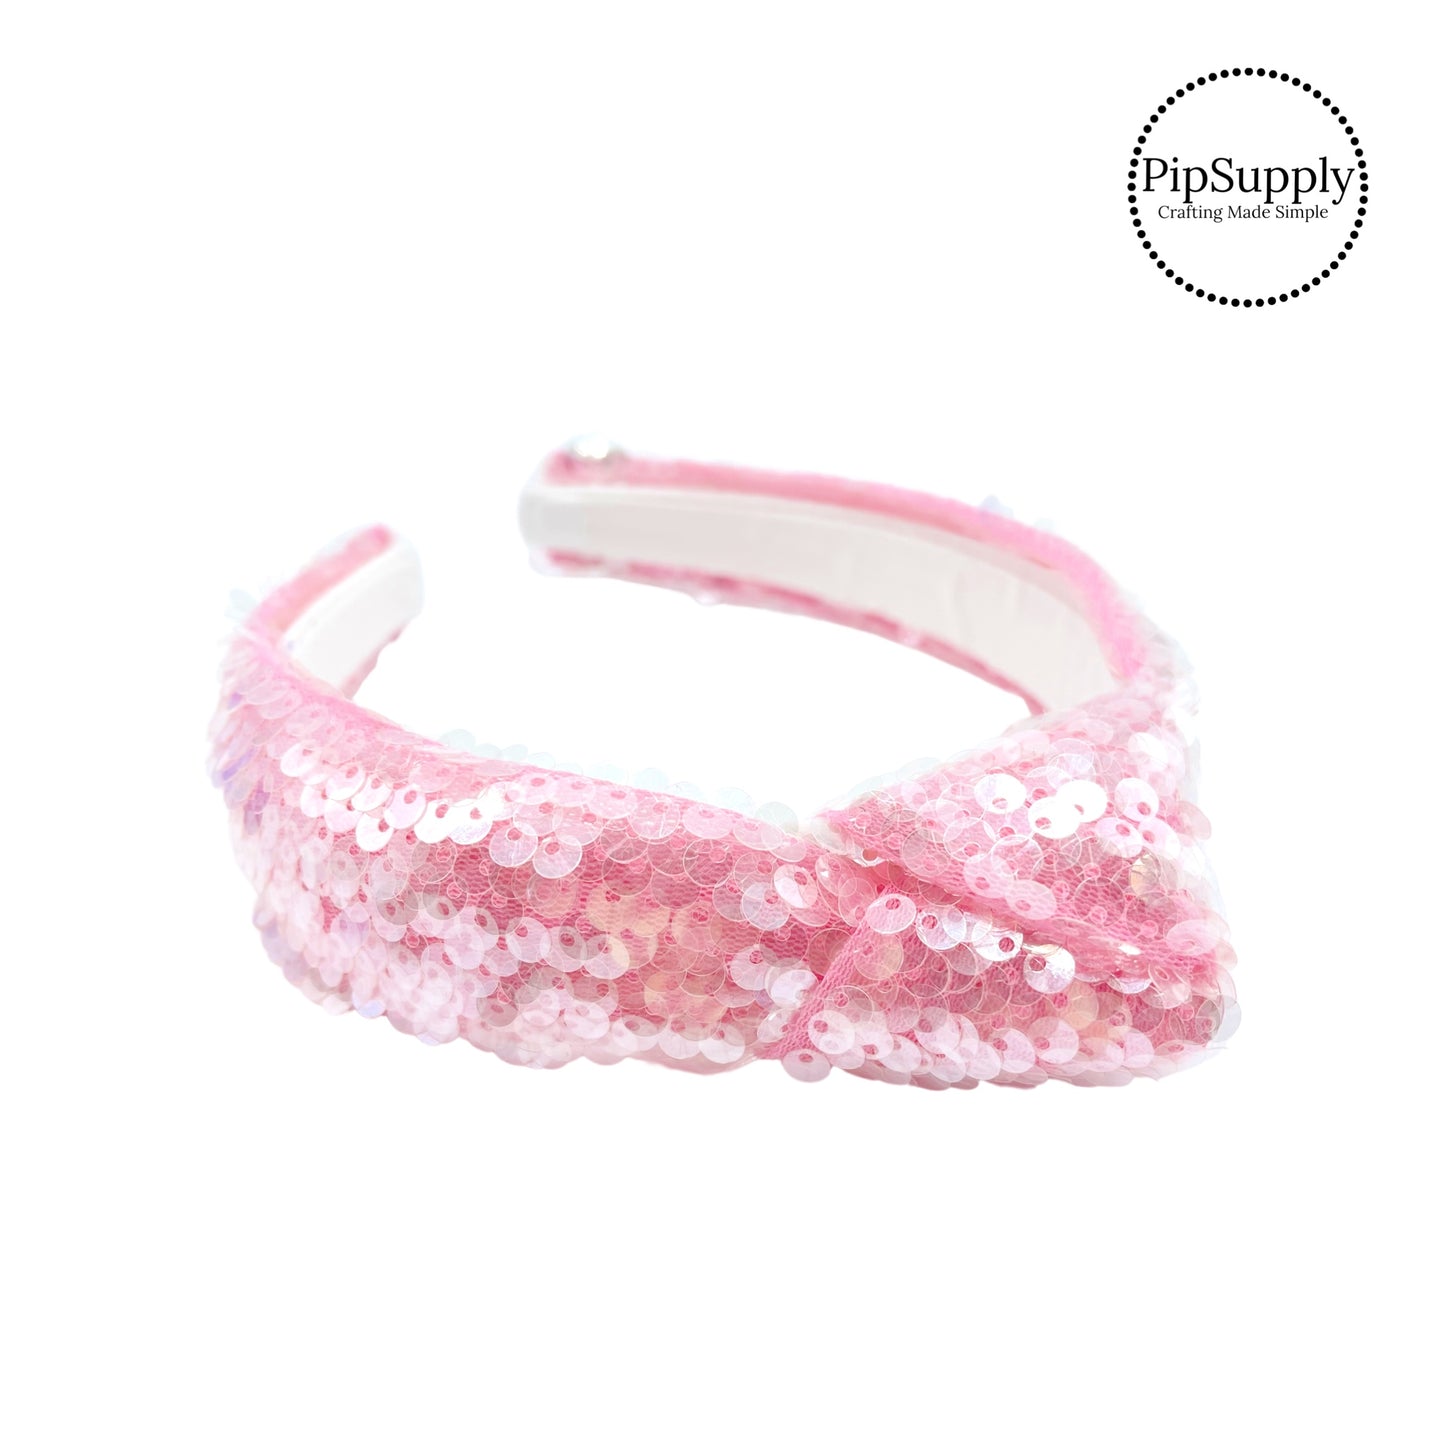 Light pink headband with clear sequins knotted headband